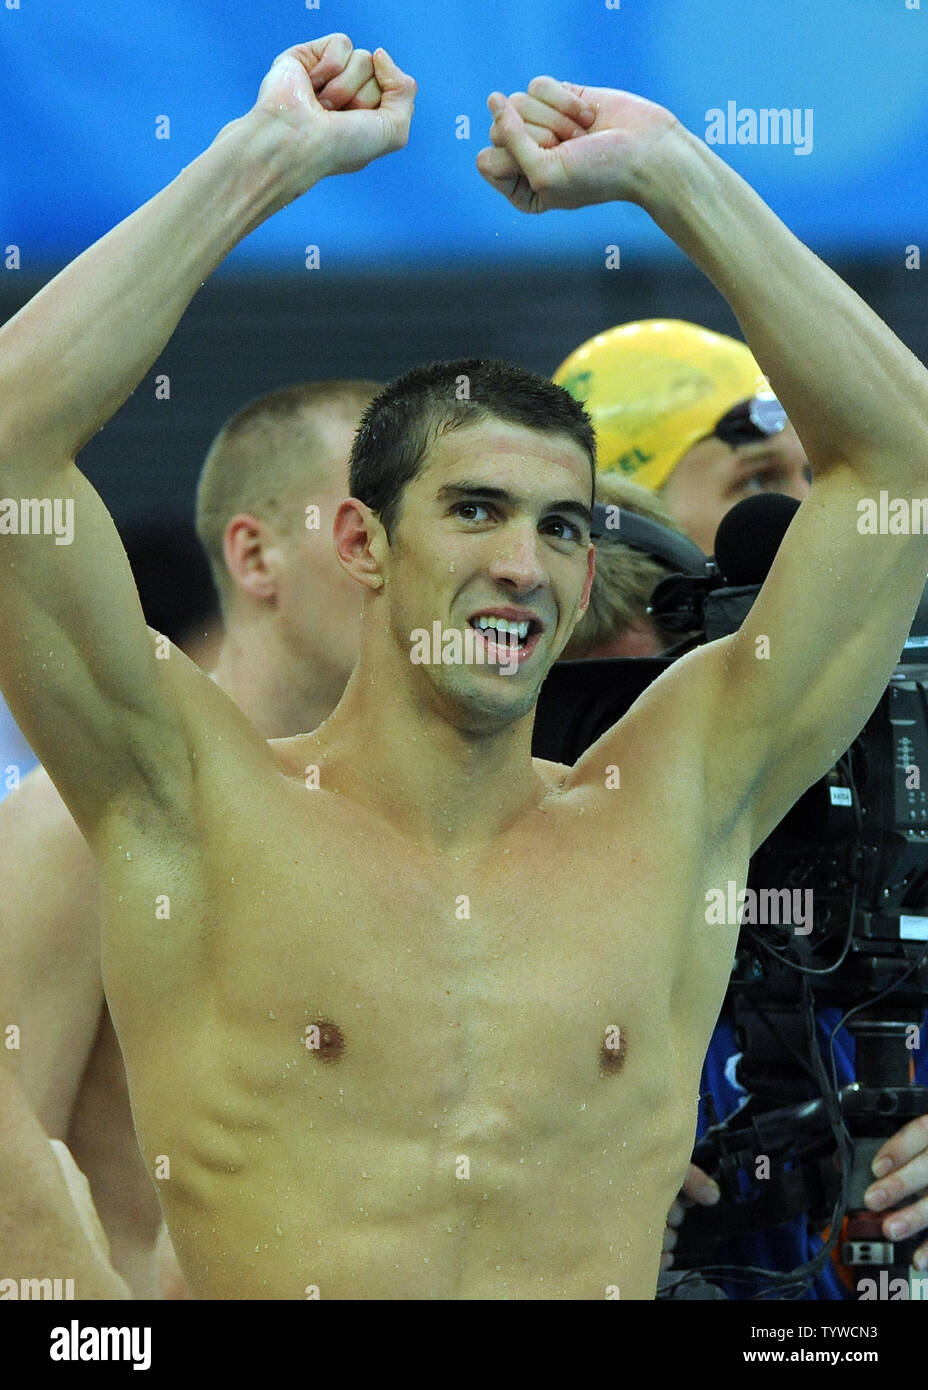 USA's Michael Phelps raises his arms in victory after the US team wins gold in the Men's 4x100M,  setting a world record, at the National Aquatic Center (Water Cube) during the 2008 Summer Olympics in Beijing, China, on August 17, 2008.  Phelps set the world record for medals in a single Olympics with 8, passing Mark Spitz.    (UPI Photo/Roger L. Wollenberg) Stock Photo